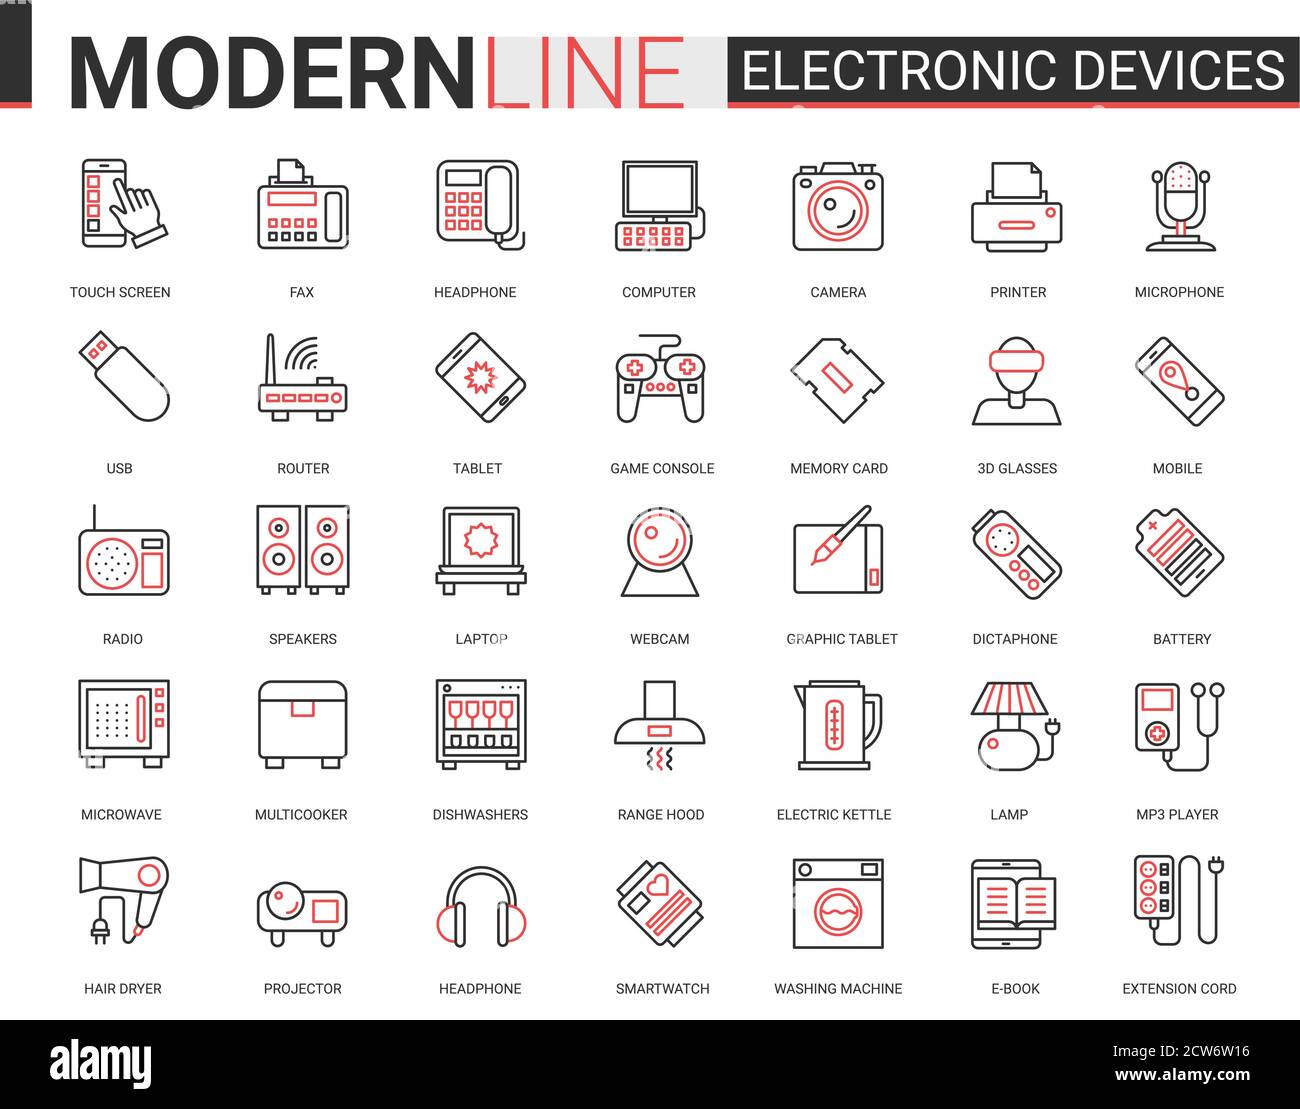 Electronic devices flat icon vector illustration set. Red black thin line computer game accessories and kitchen appliances collection of outline electronically symbols for gadget or kitchenware store Stock Vector